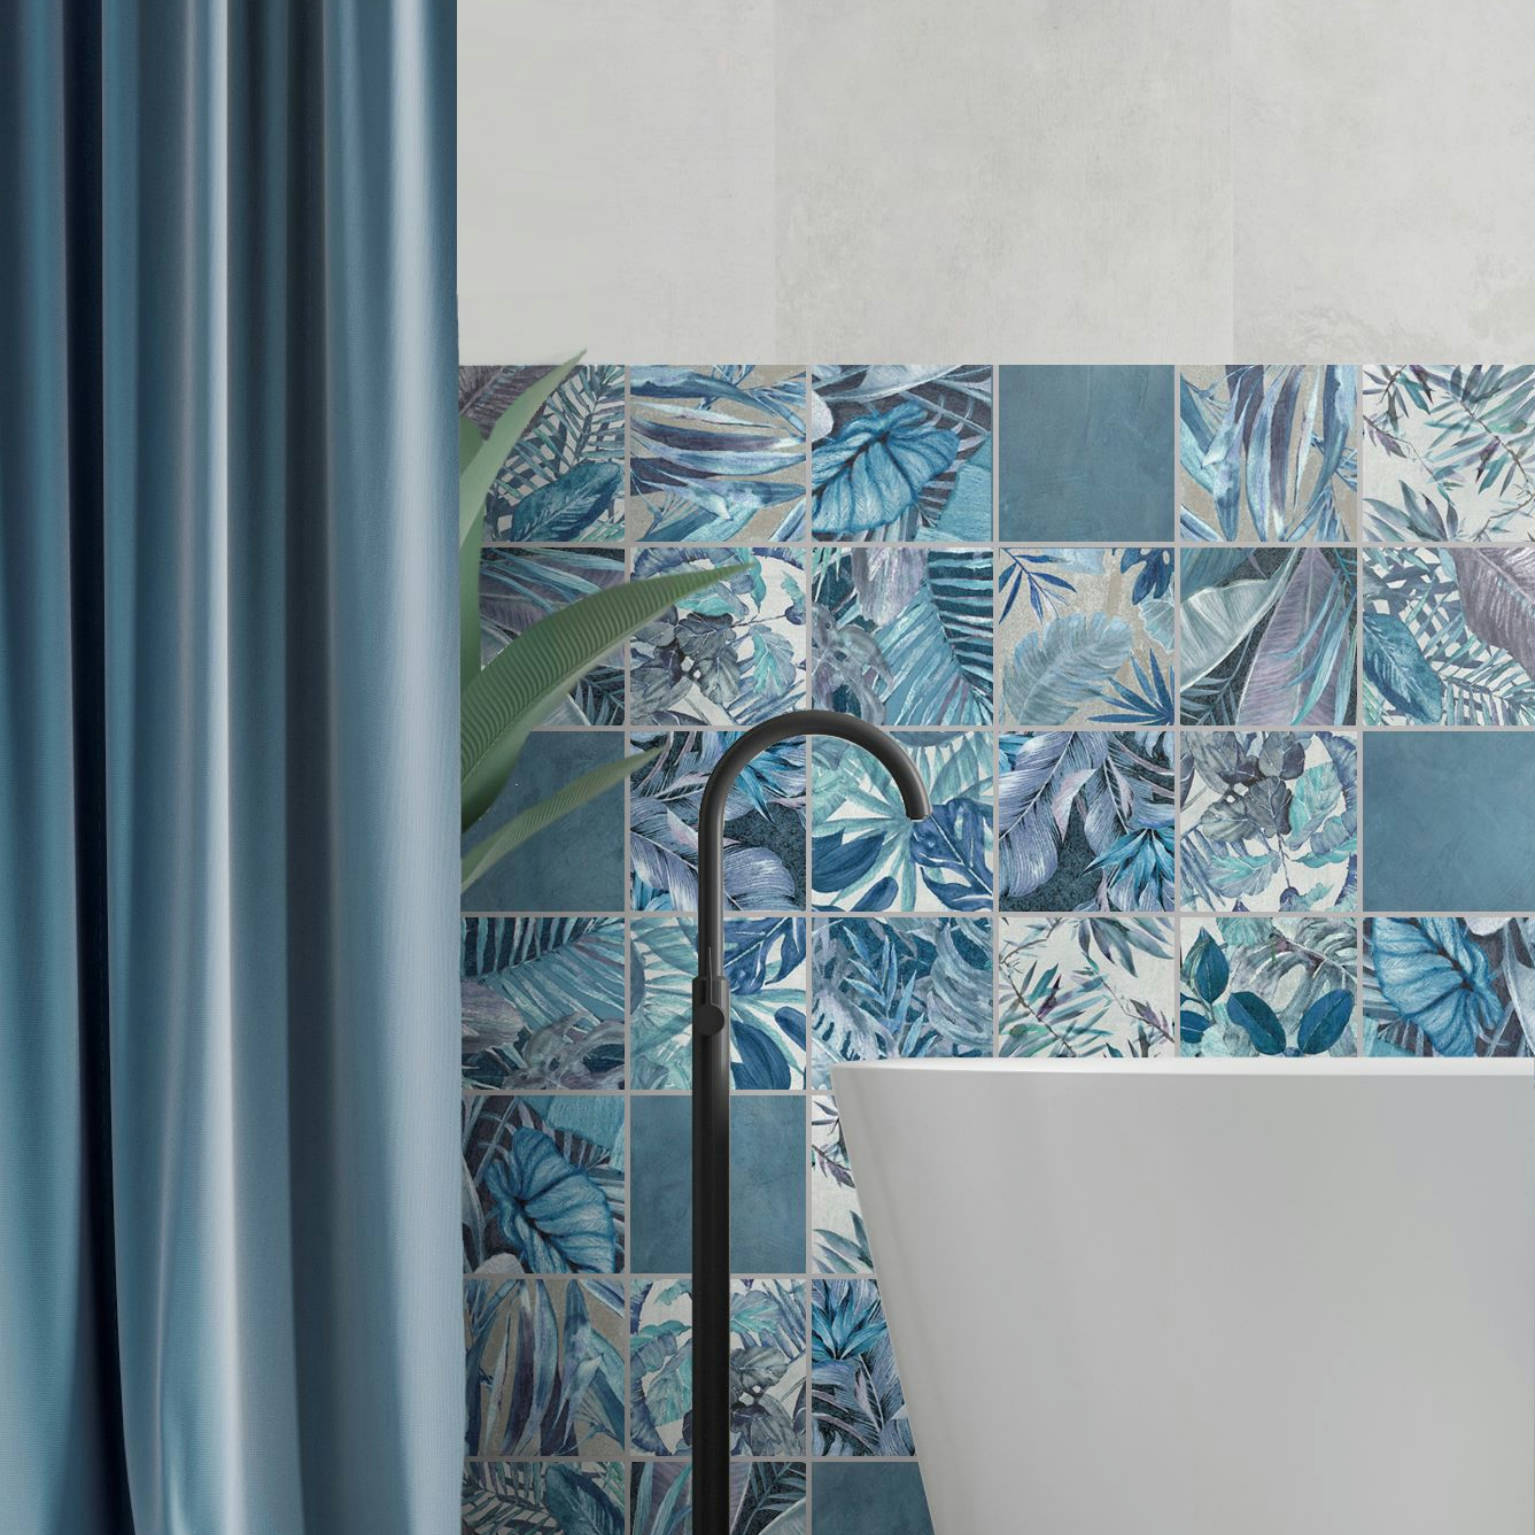 Floral_6_G | Stones And More | Finest selection of Mosaics, Glass, Tile and Stone